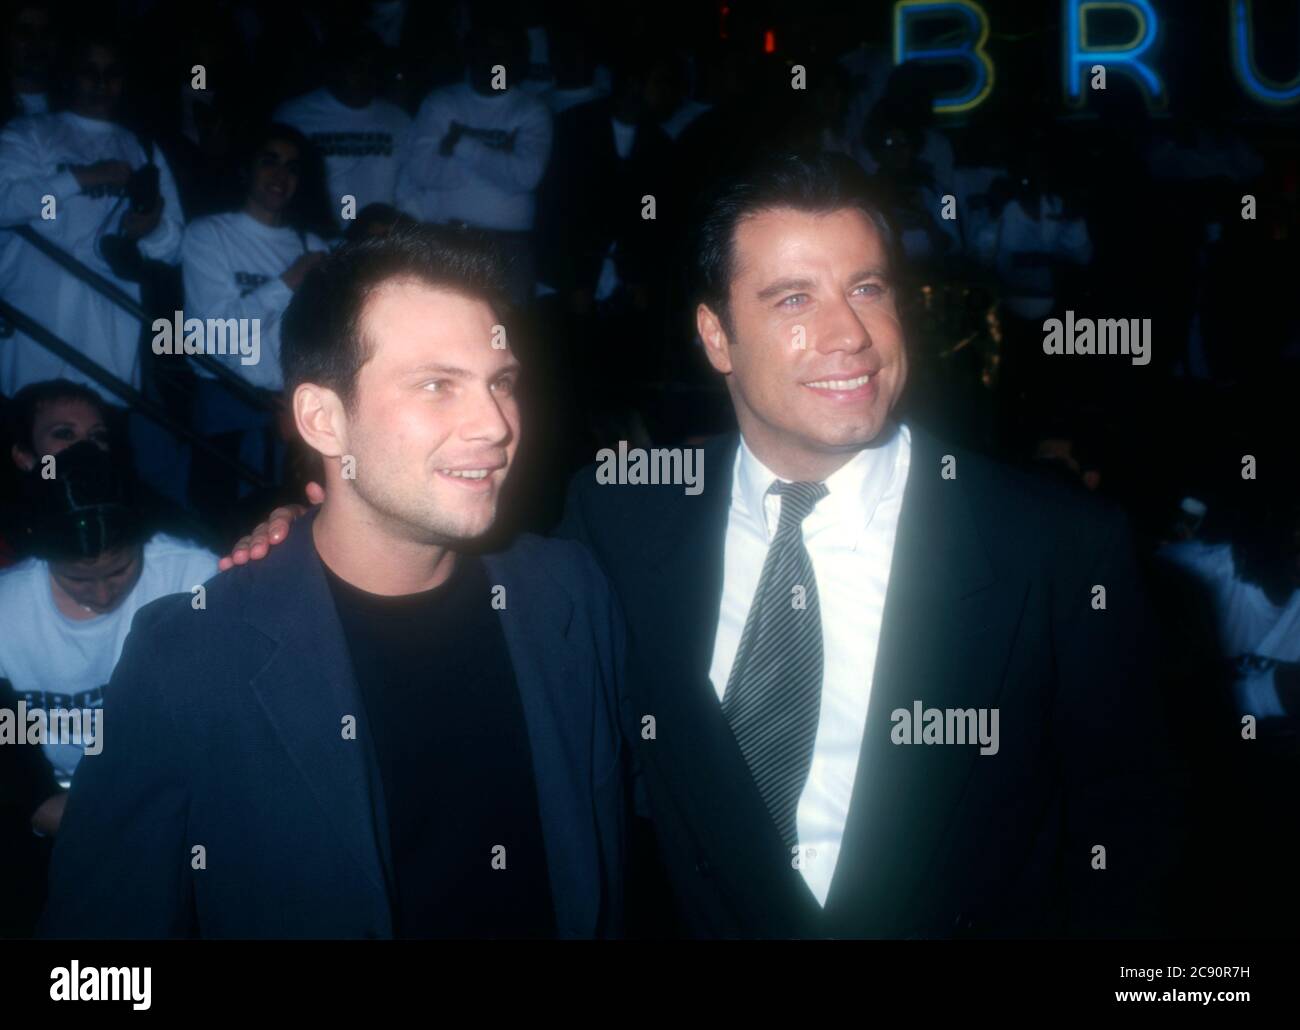 Westwood, California, USA 5th February 1996 Actor Christian Slater and actor John Travolta attend 20th Century Fox' 'Broken Arrow' Premiere on February 5, 1996 at Mann Village Theatre in Westwood, California, USA. Photo by Barry King/Alamy Stock Photo Stock Photo